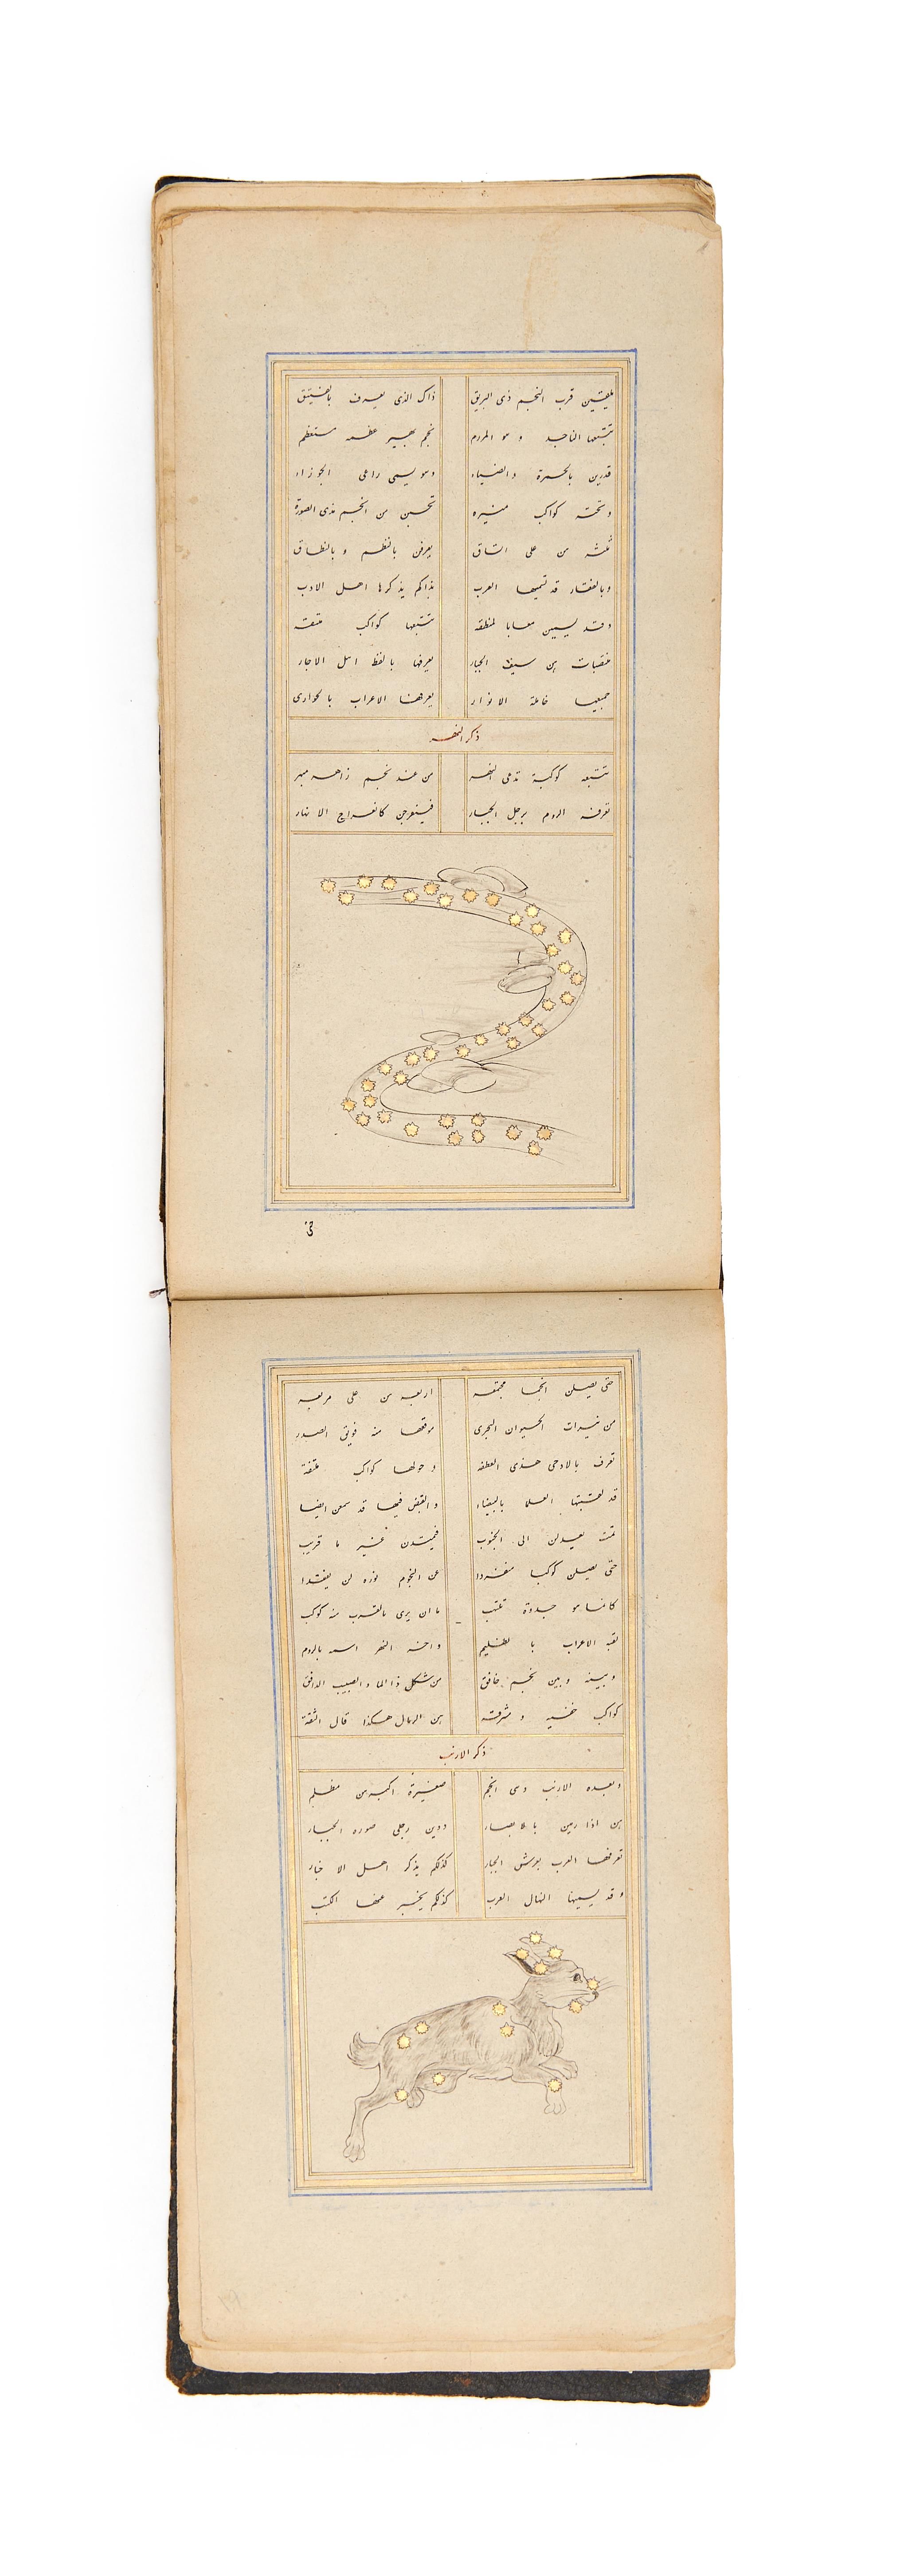 A RARE ILLUMINATED & ILLUSTRATED PERSIAN POETRY BOOK, ABD AL RAHMAN IN SUFI TEXT, LATE 17TH/ EARLY - Image 17 of 34